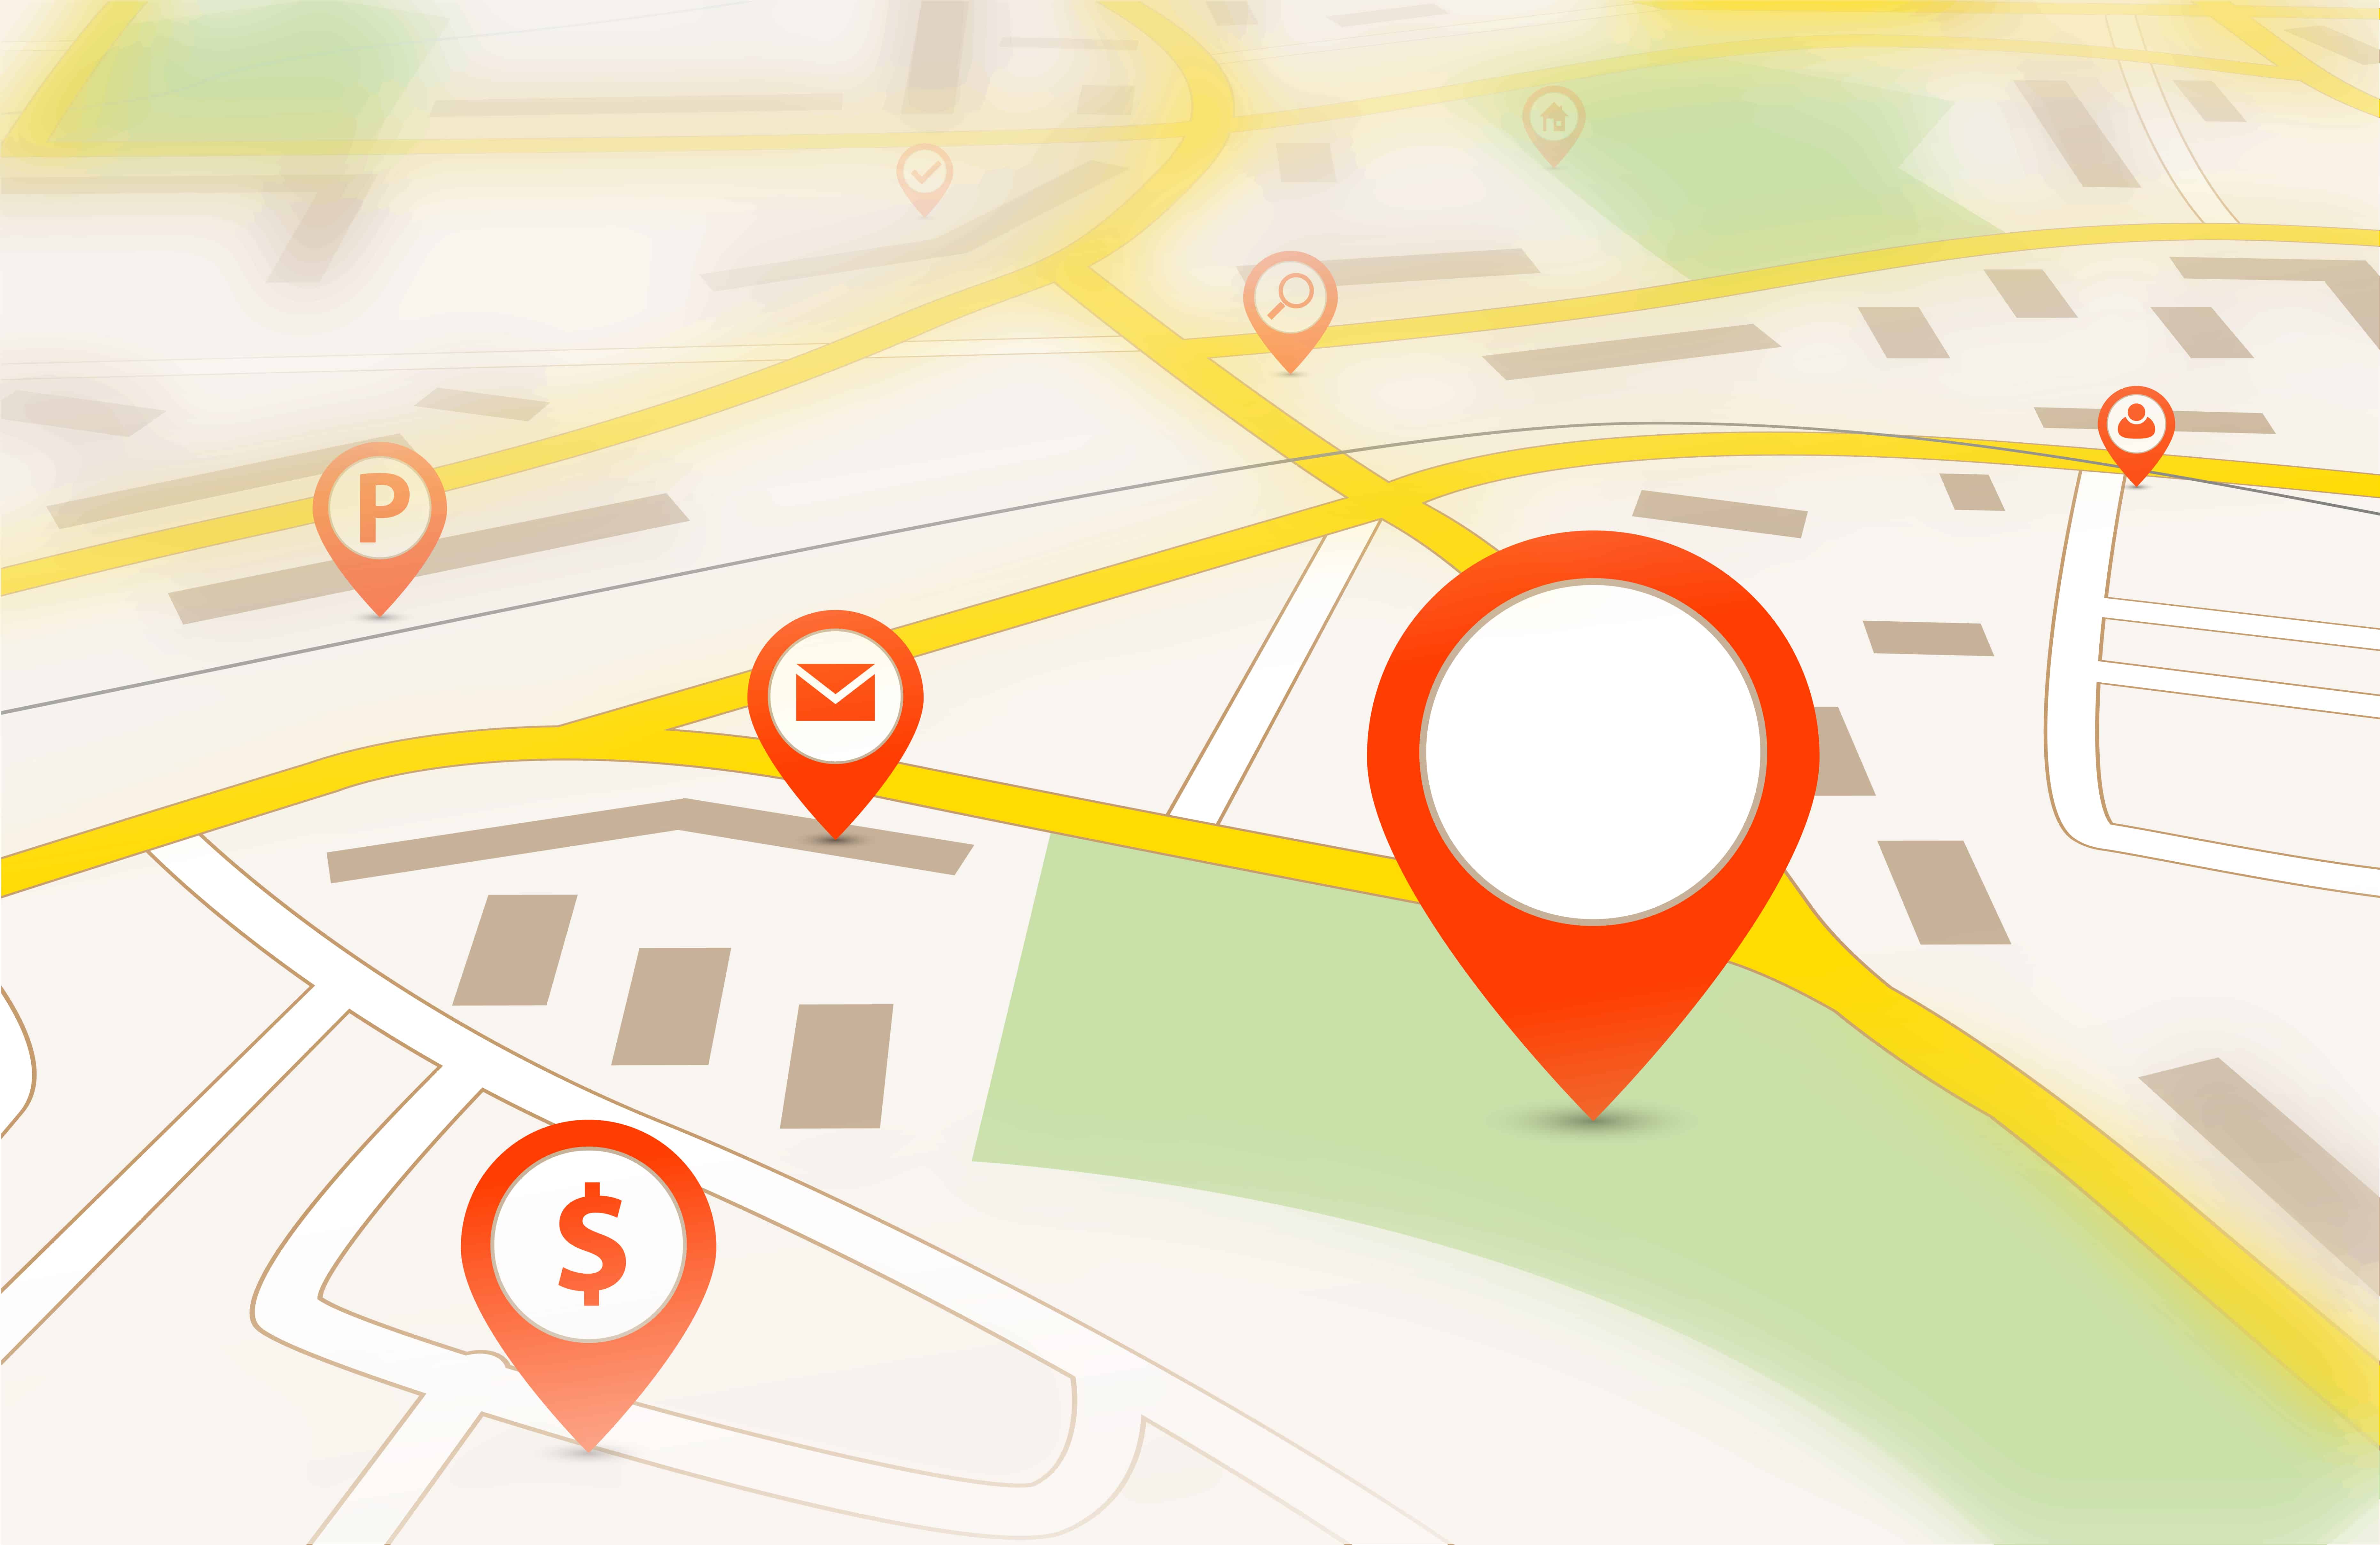 Google Drops Location Feature but Your SEO Team Can Still Monitor Your Local Results